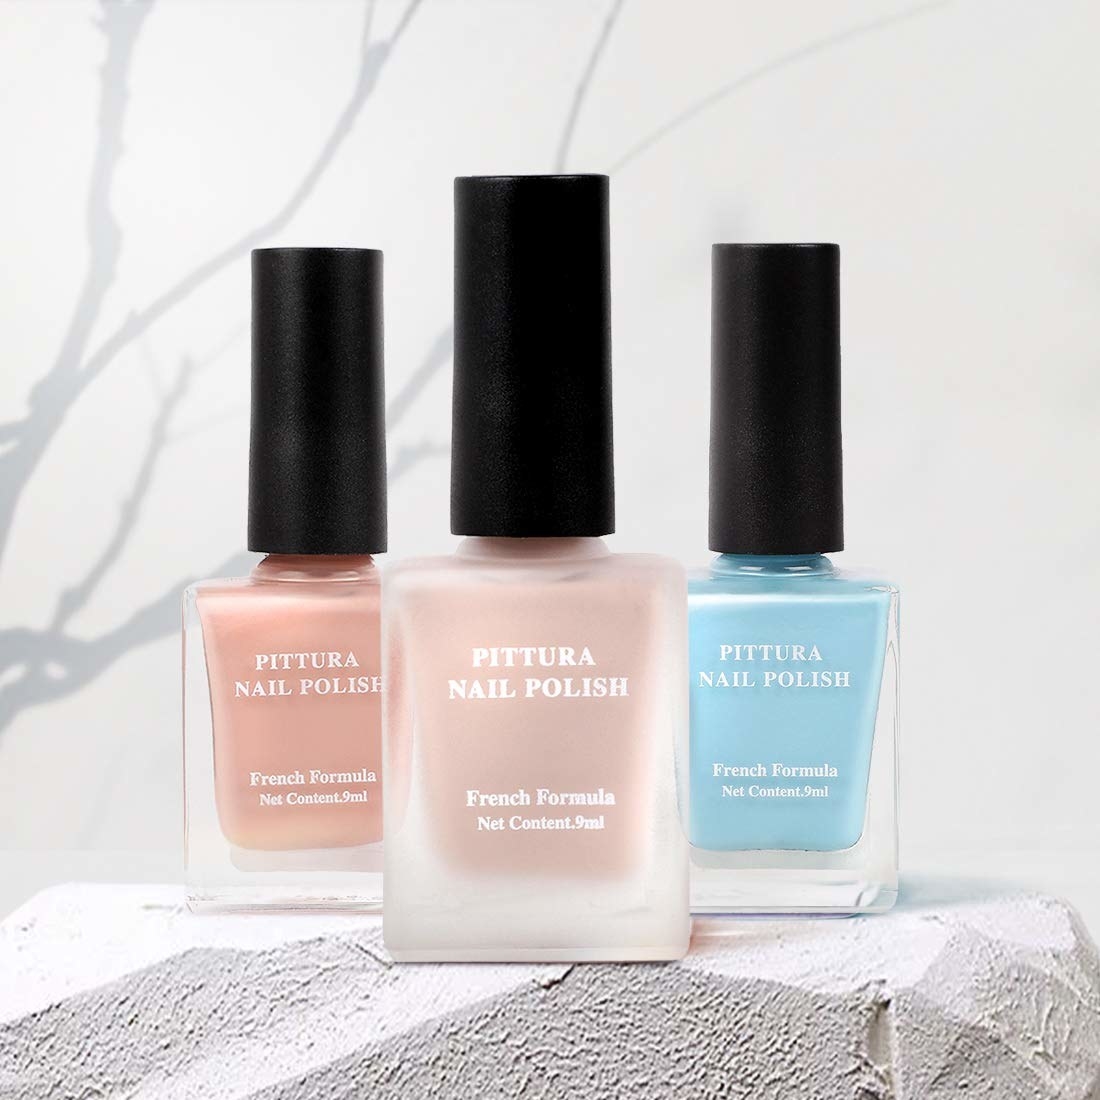 3 different glossy nail polishes from Miniso in the shades peachy beige, light blue and matte nude